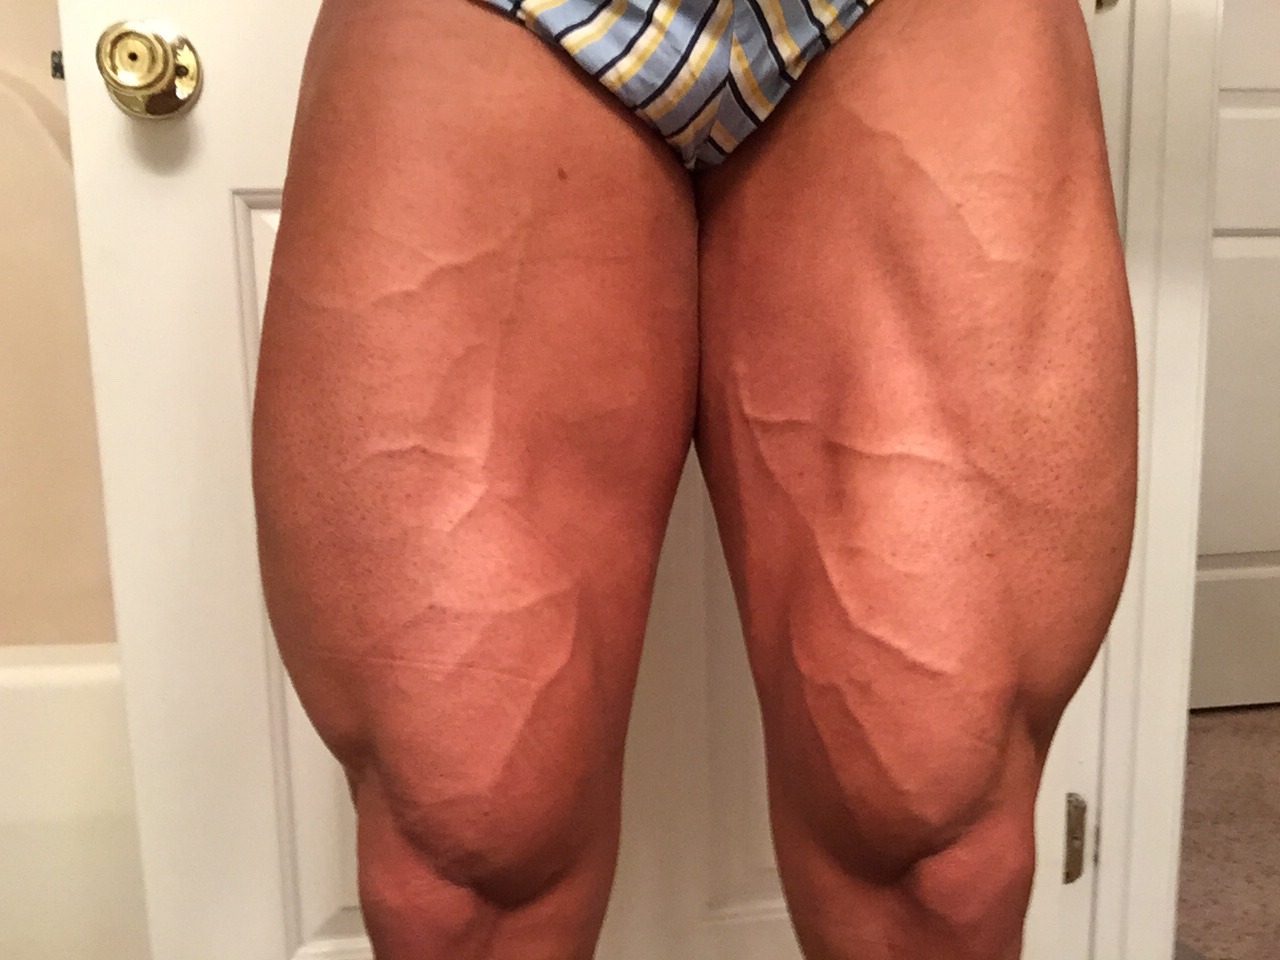 My legs 2 mornings after show